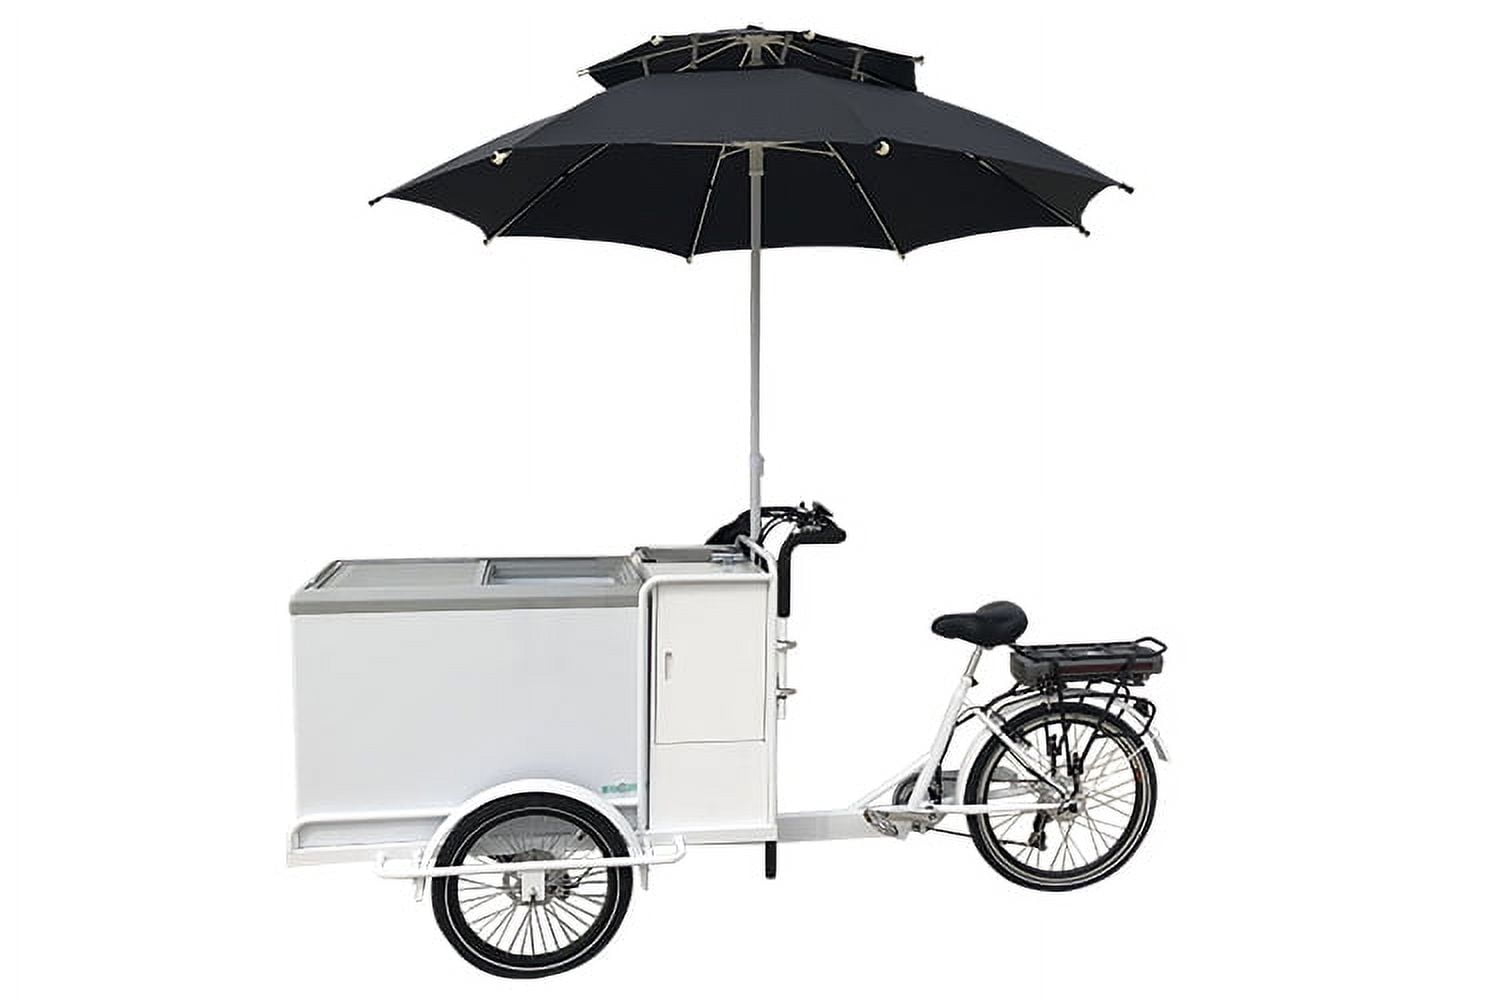 Pick and Mix Sweet Stands - Mobile Food and Drink Carts, Tricycles